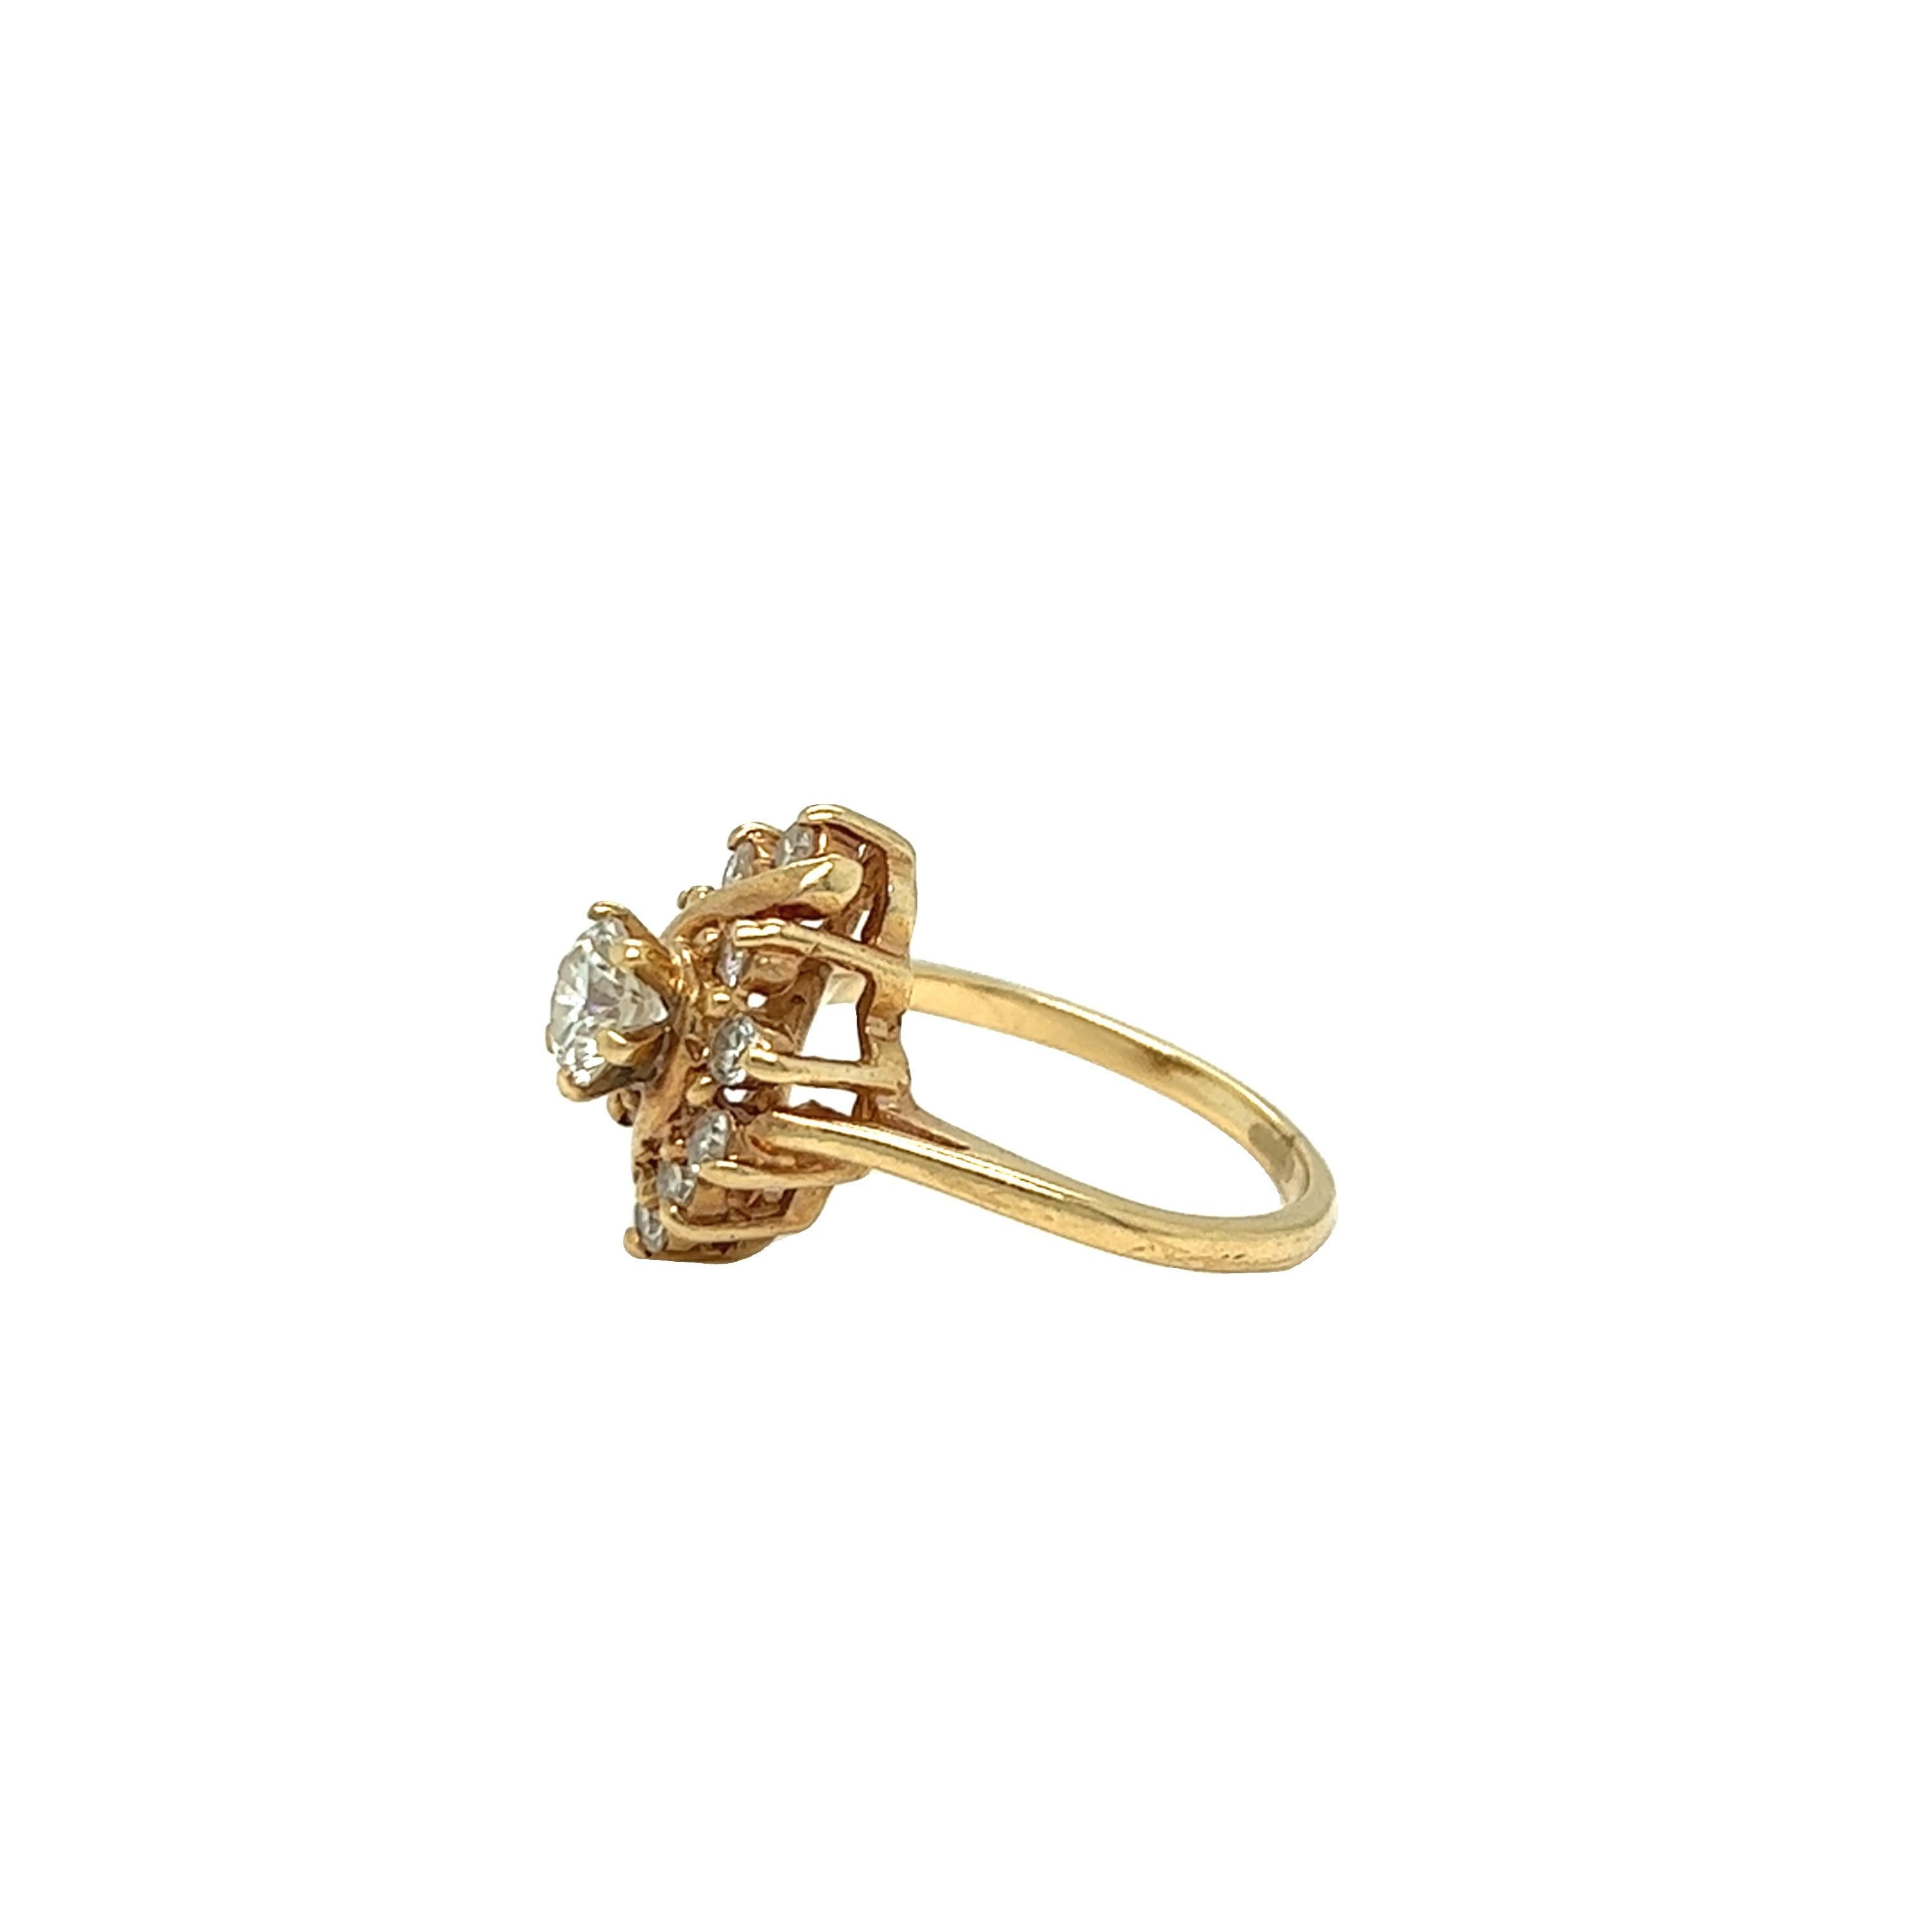 Vintage Navette Bypass Diamond Ring 14K Yellow Gold In Excellent Condition For Sale In beverly hills, CA